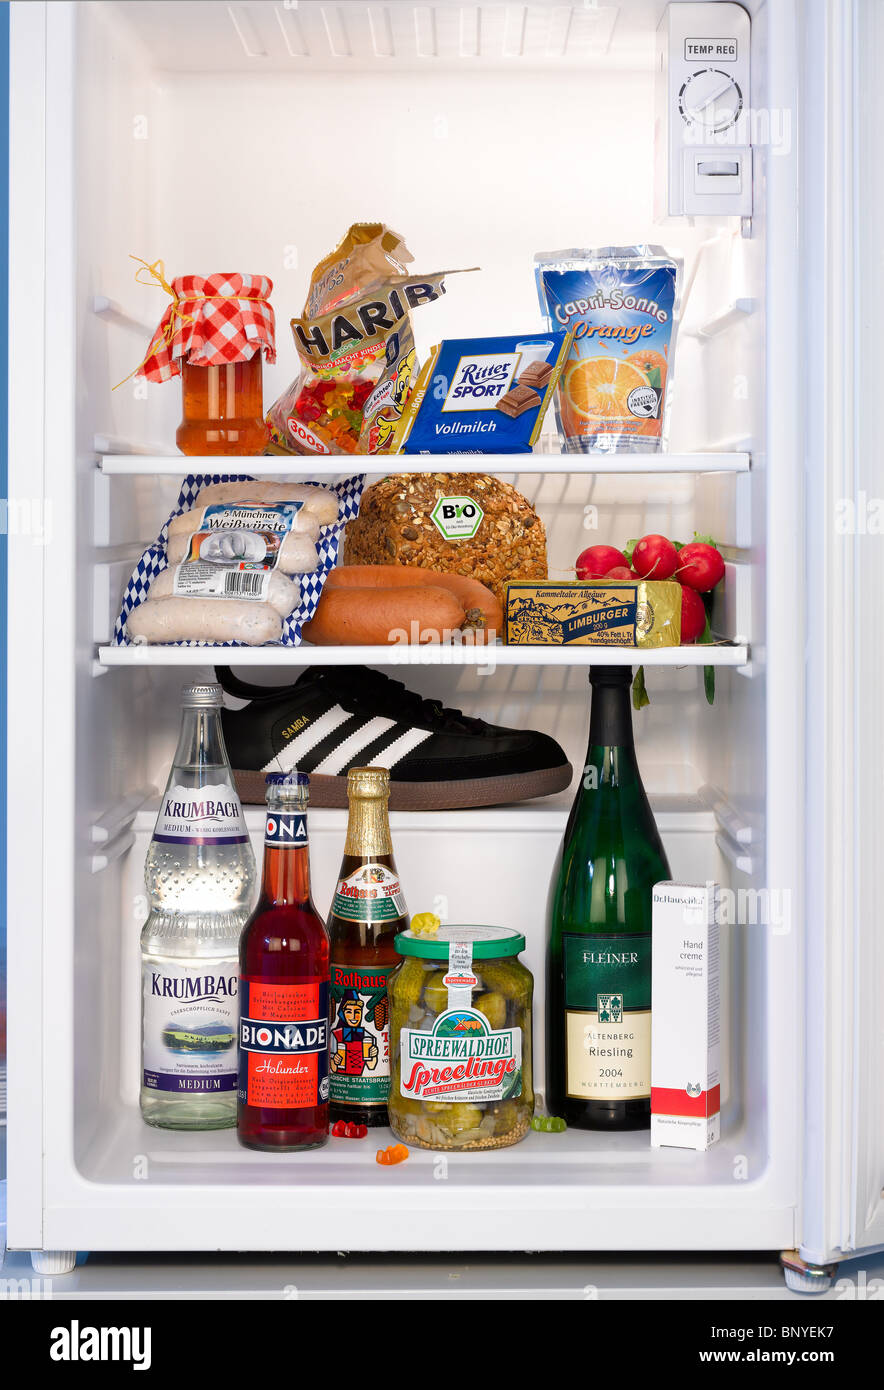 Various food products and a sports shoe in a fridge, Berlin, Germany Stock Photo